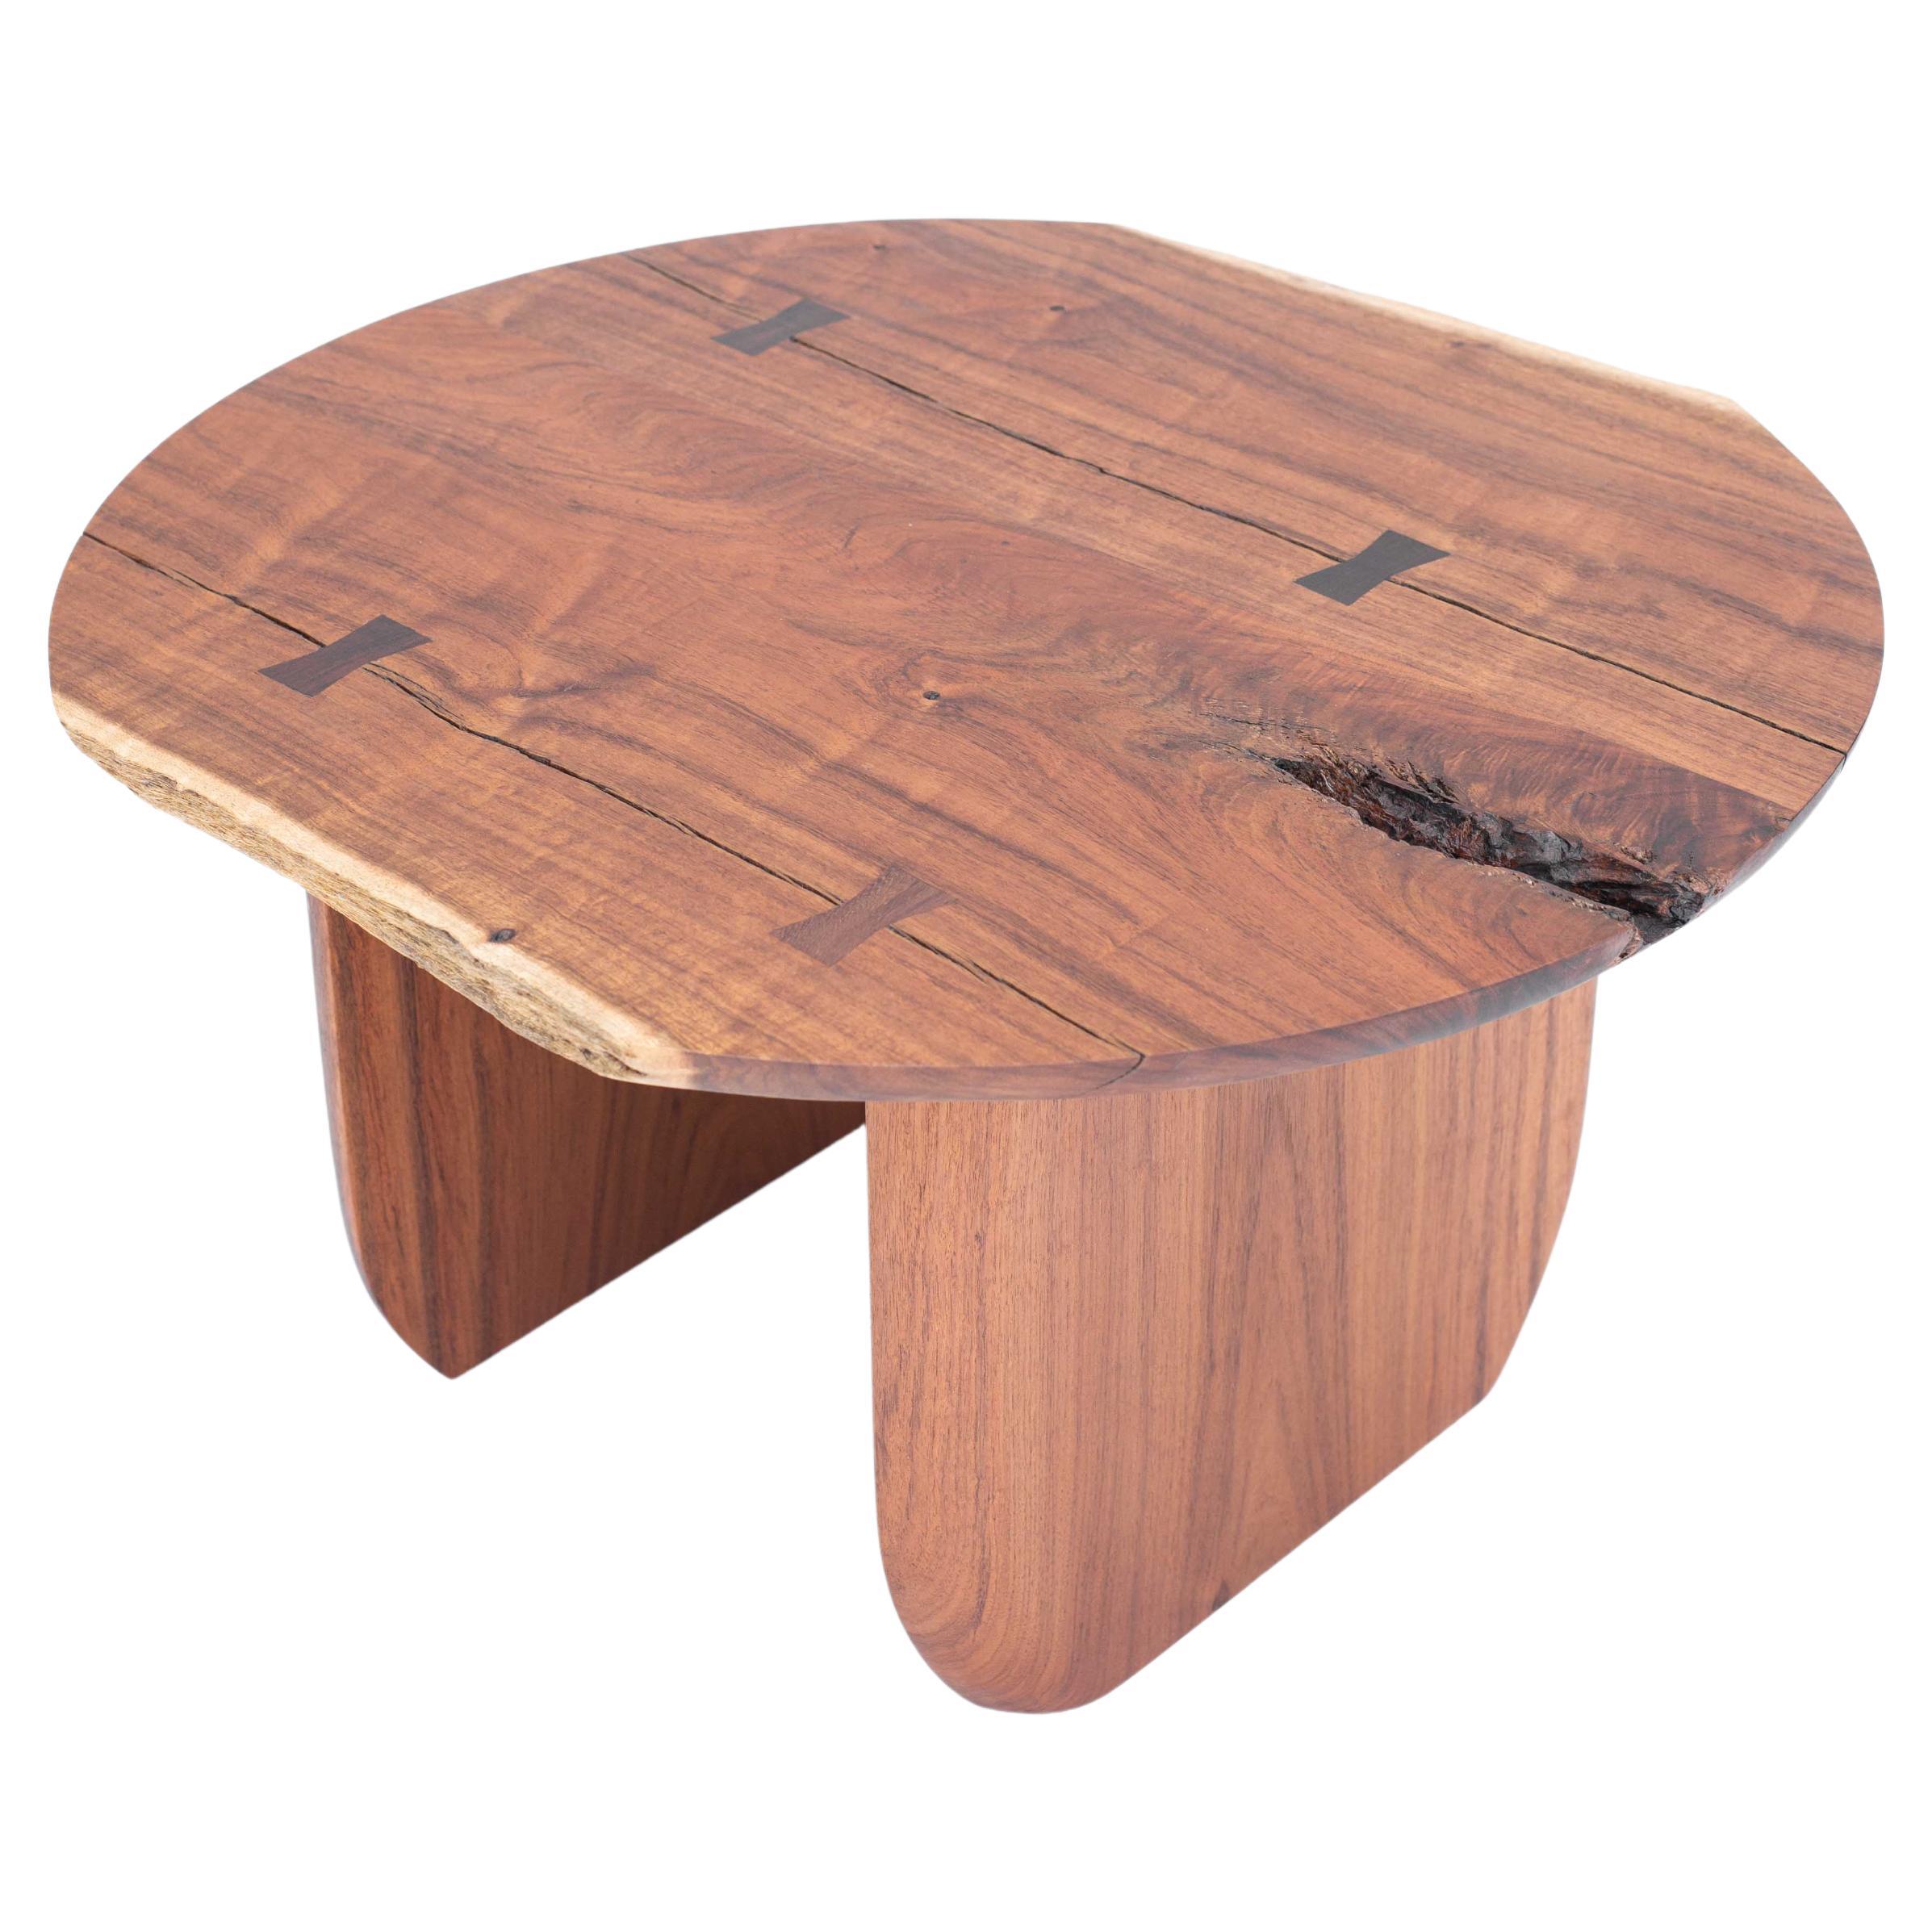 Organic Modern Coffee Table in Caribbean Walnut Tropical Wood, Unique Piece For Sale